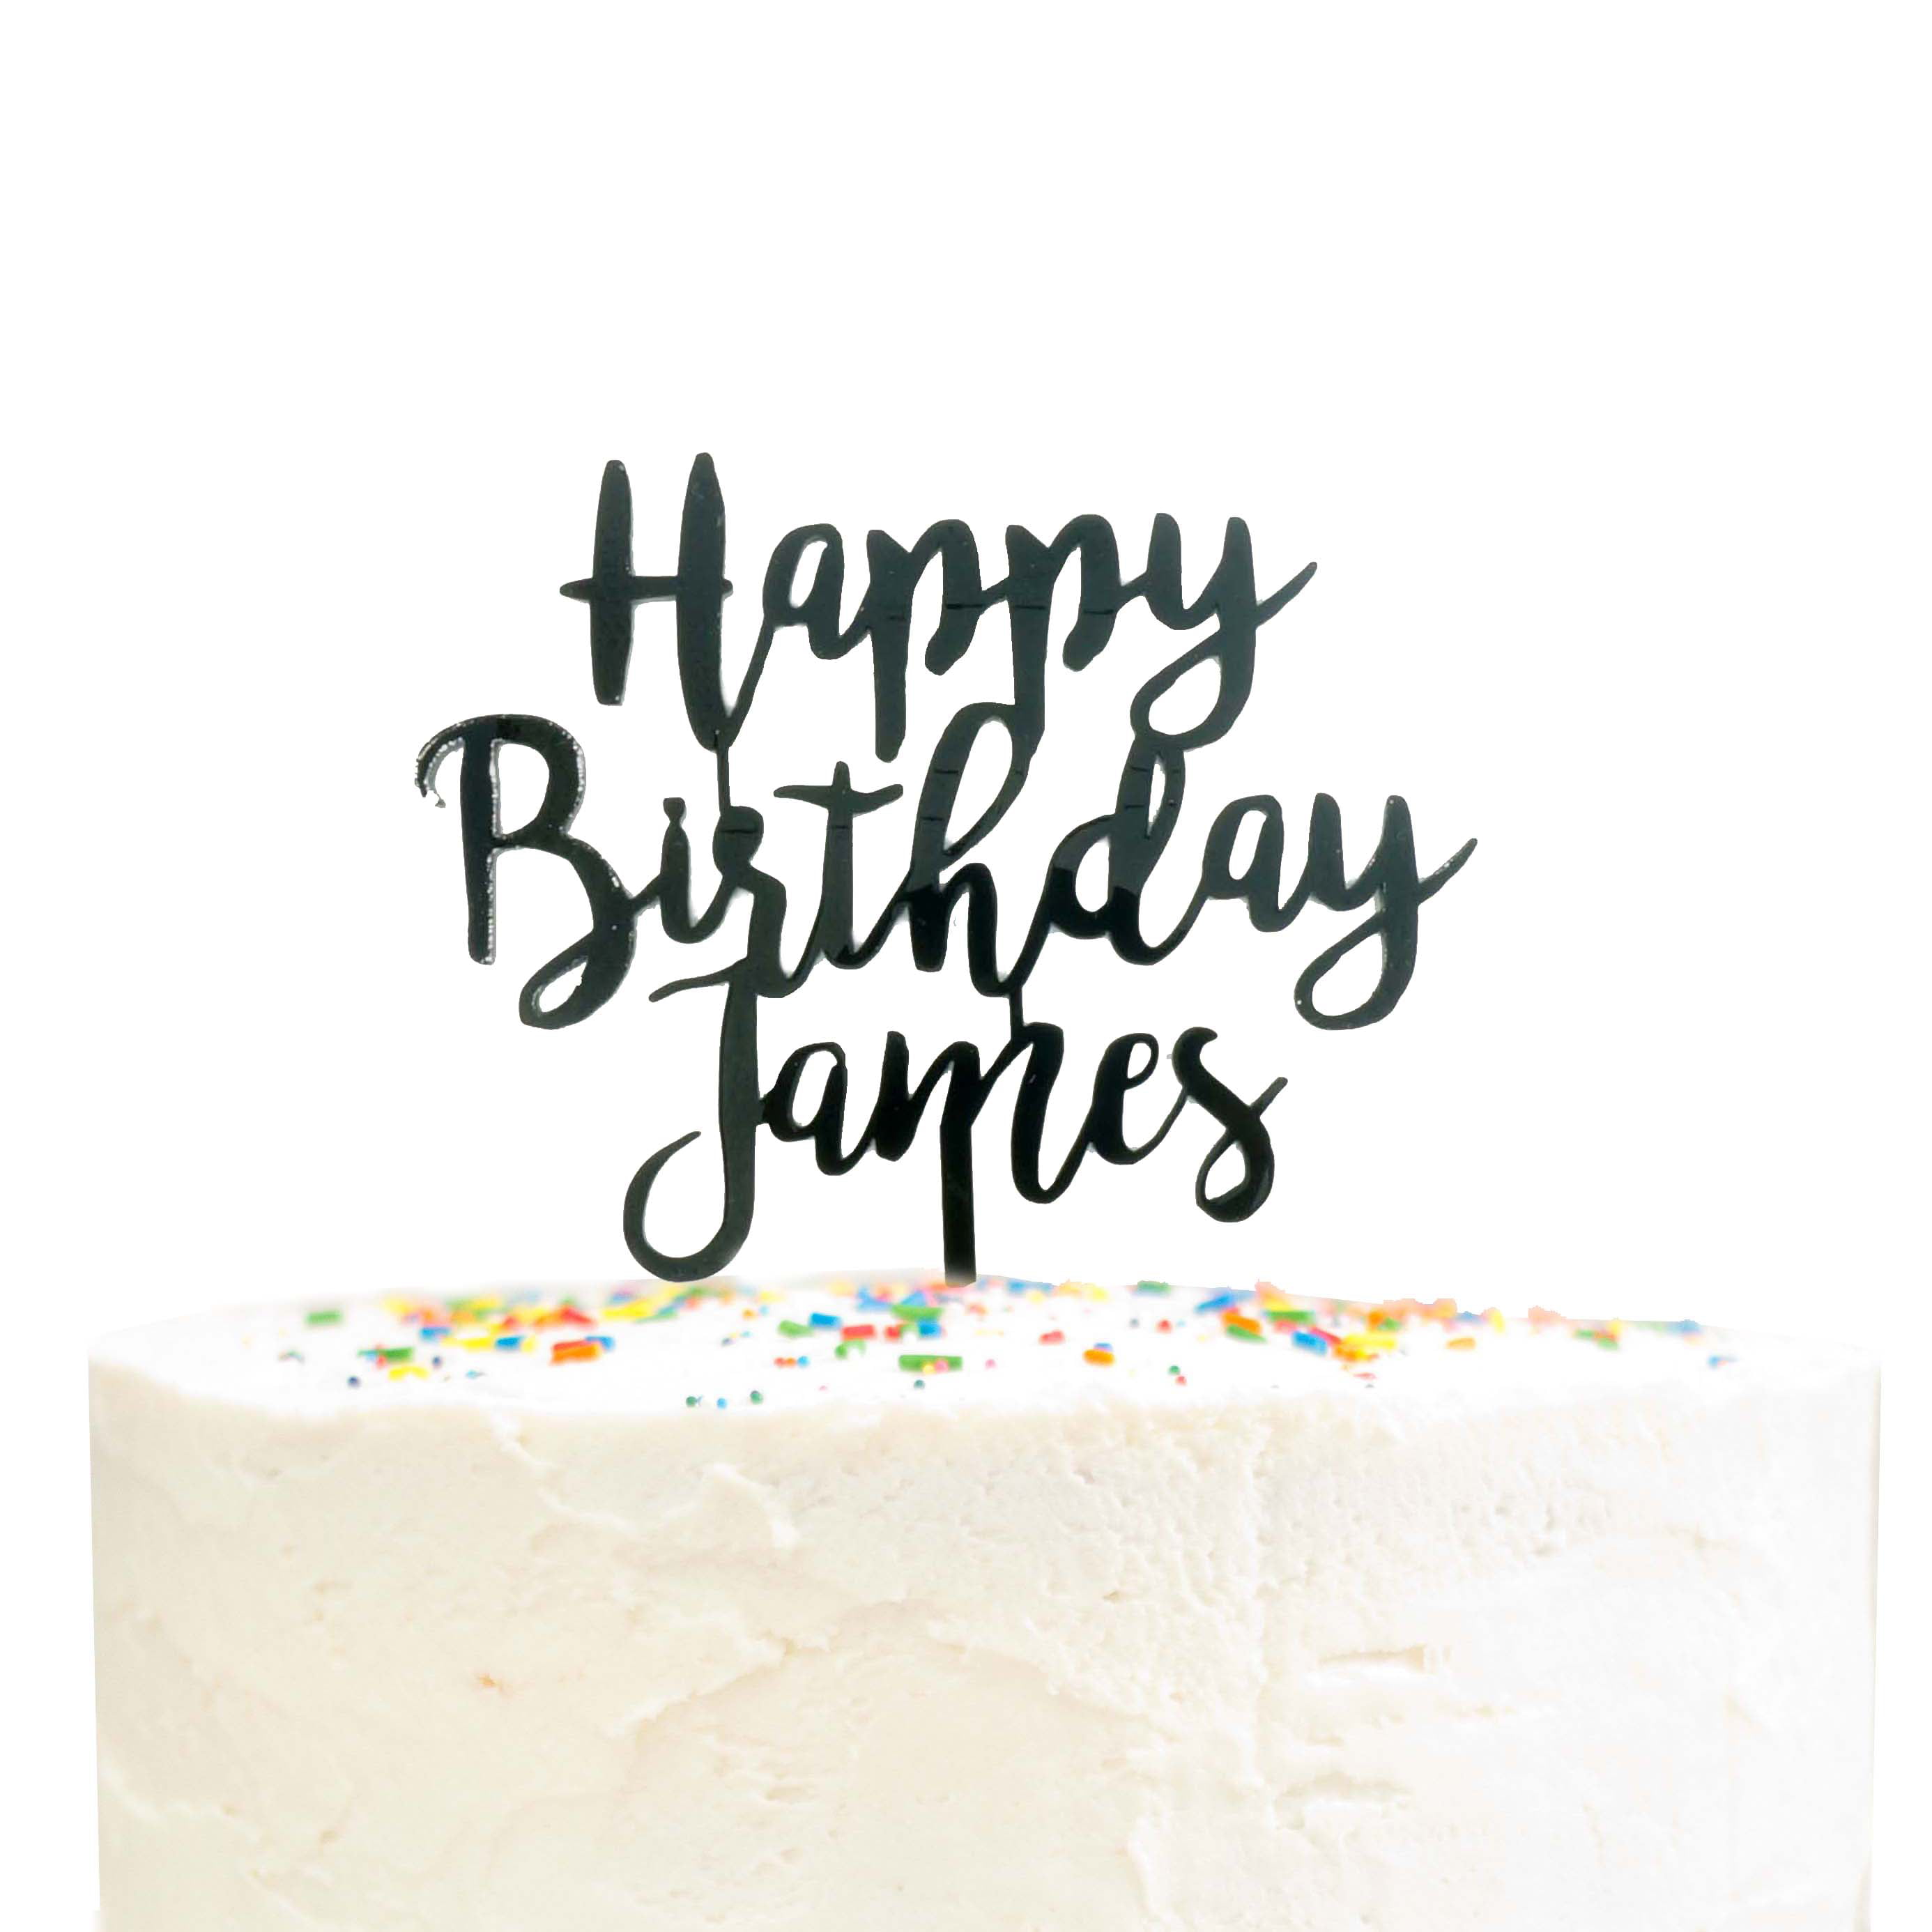 Details about  / Custom Happy Birthday Cake Topper Cursive Calligraphy Name Personalized